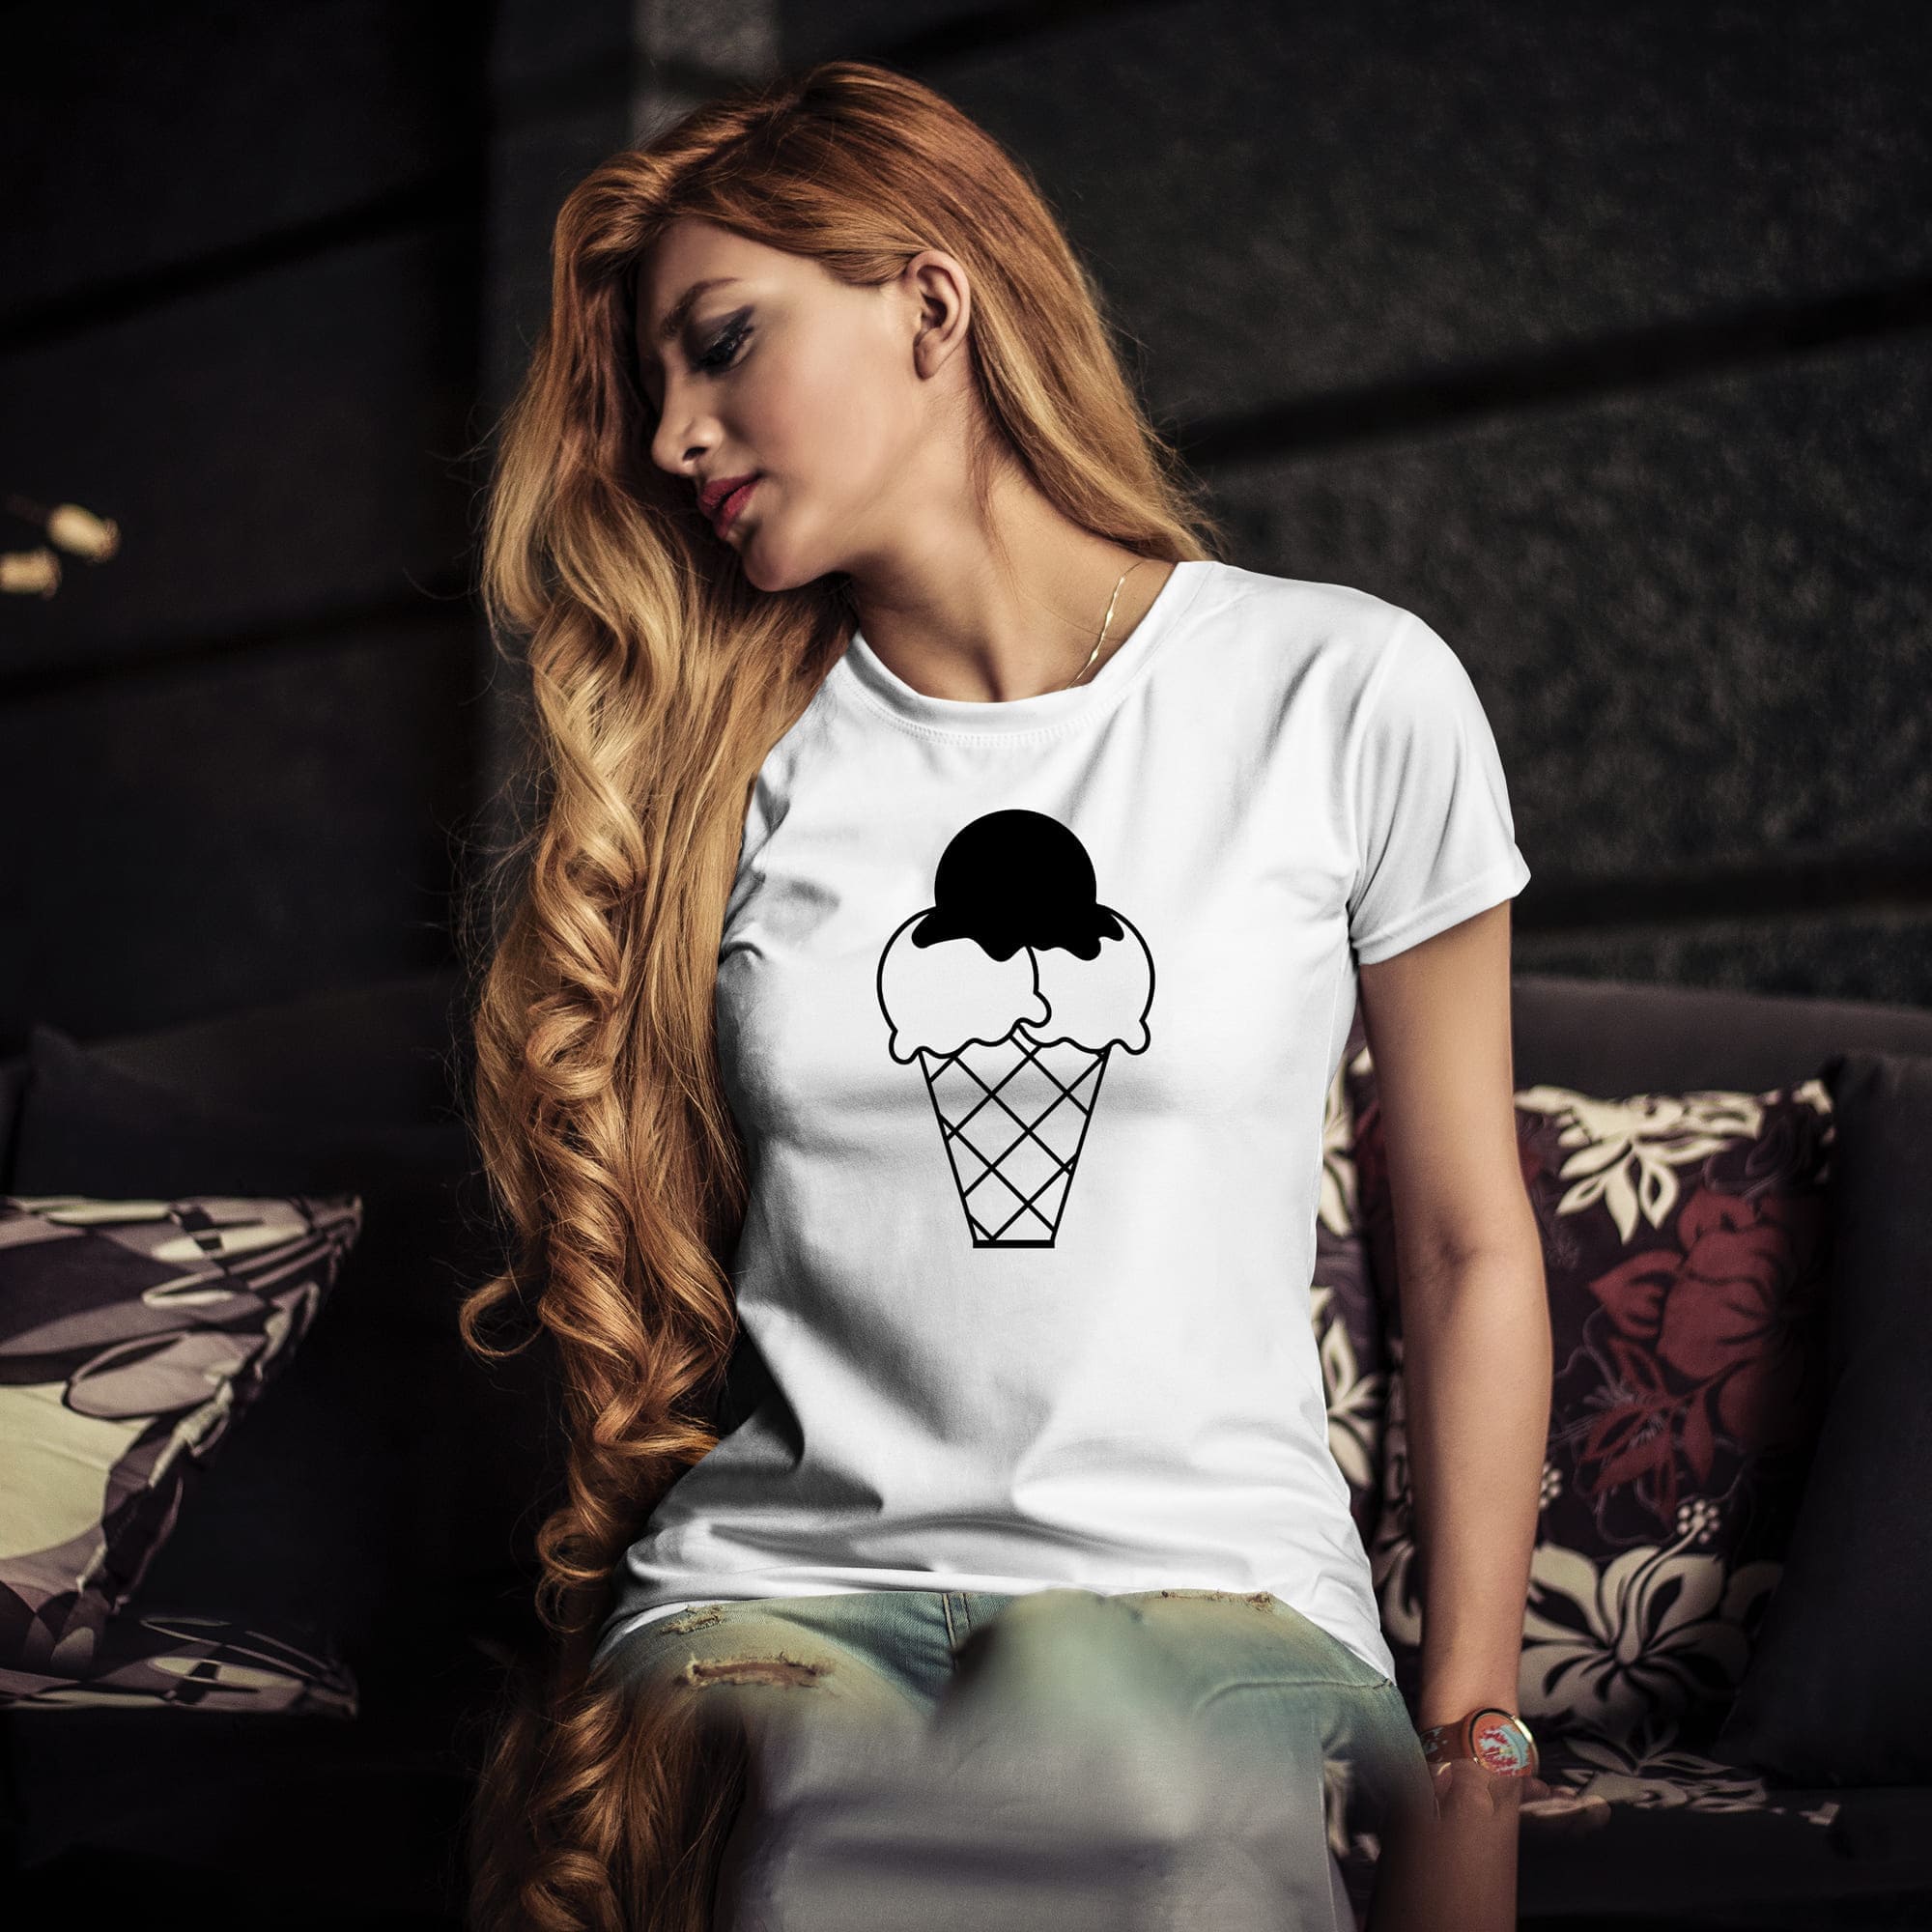 Ice cream painted on a white T-shirt.